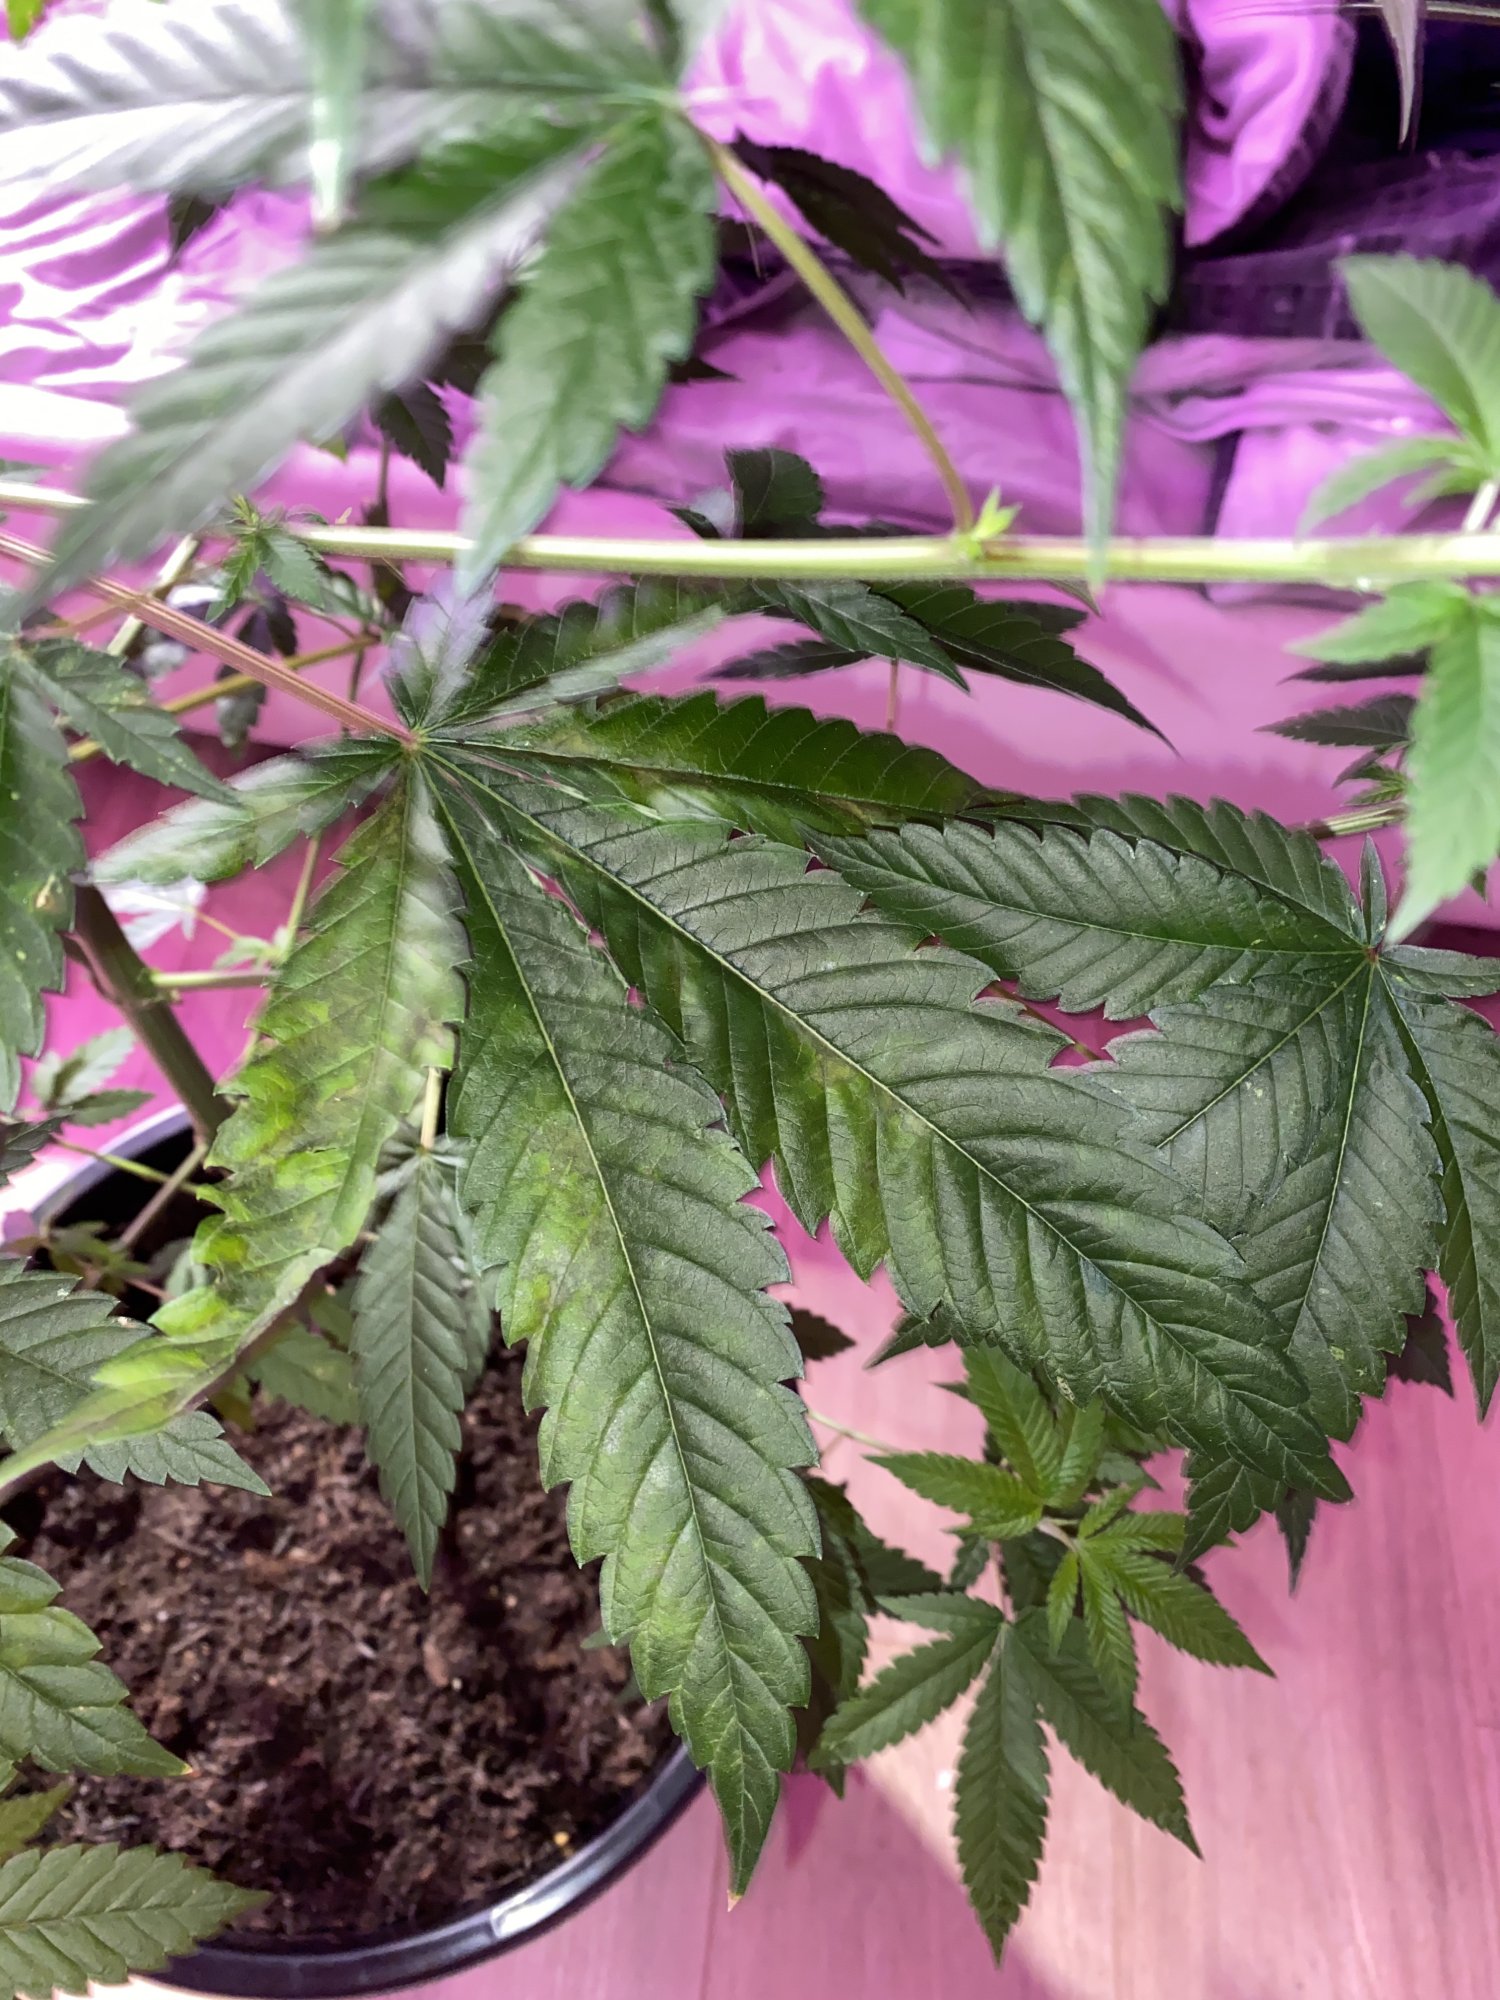 Please help first time growing 2